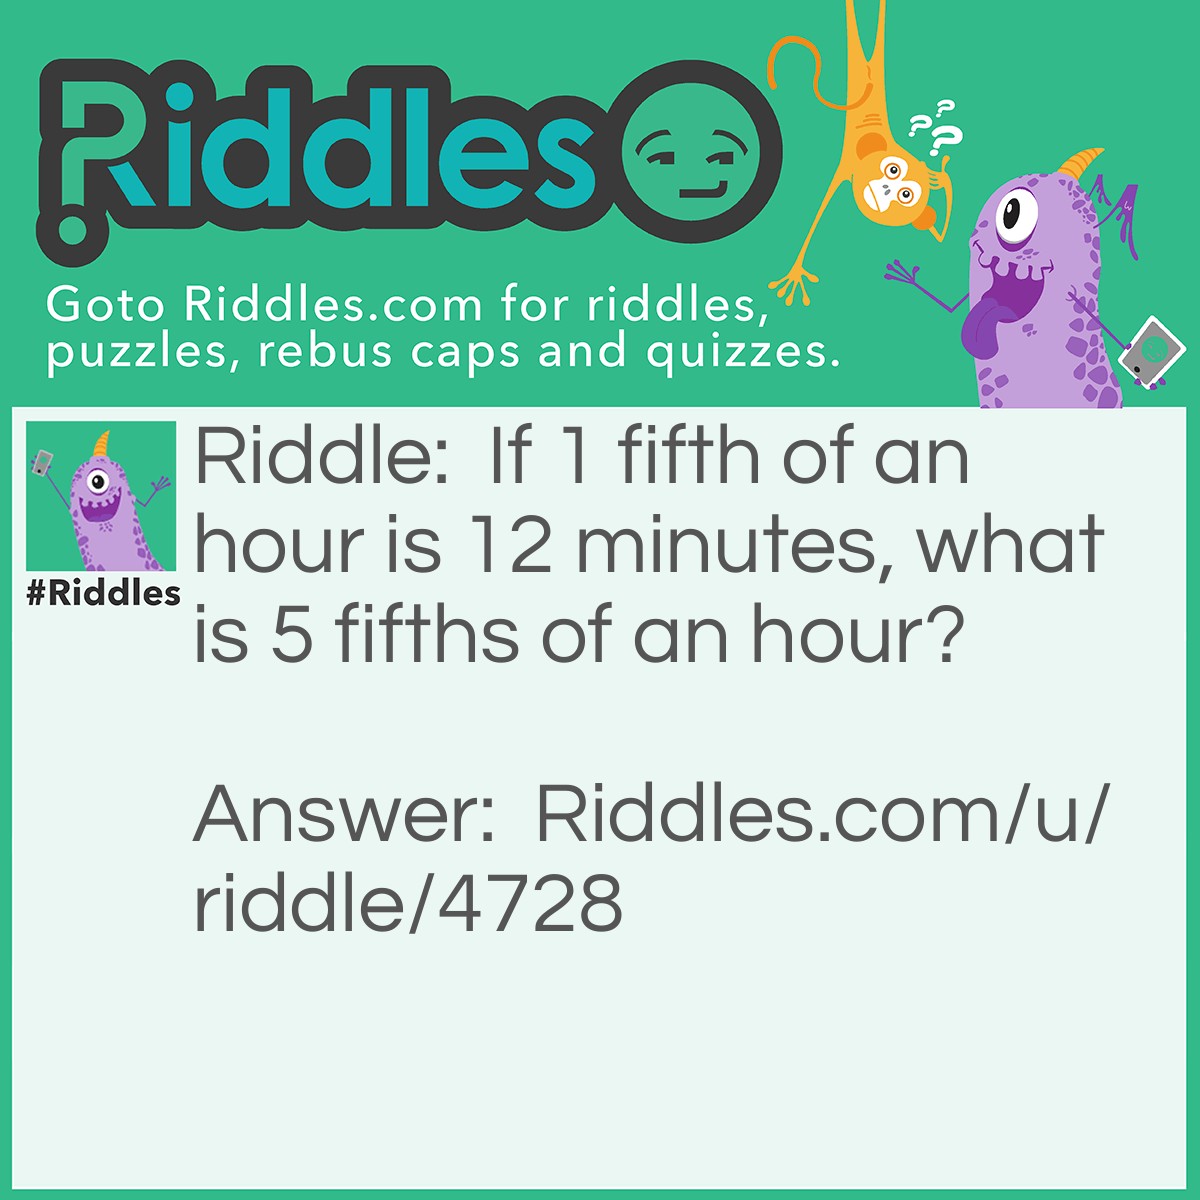 Riddle: If 1 fifth of an hour is 12 minutes, what is 5 fifths of an hour? Answer: The whole hour.